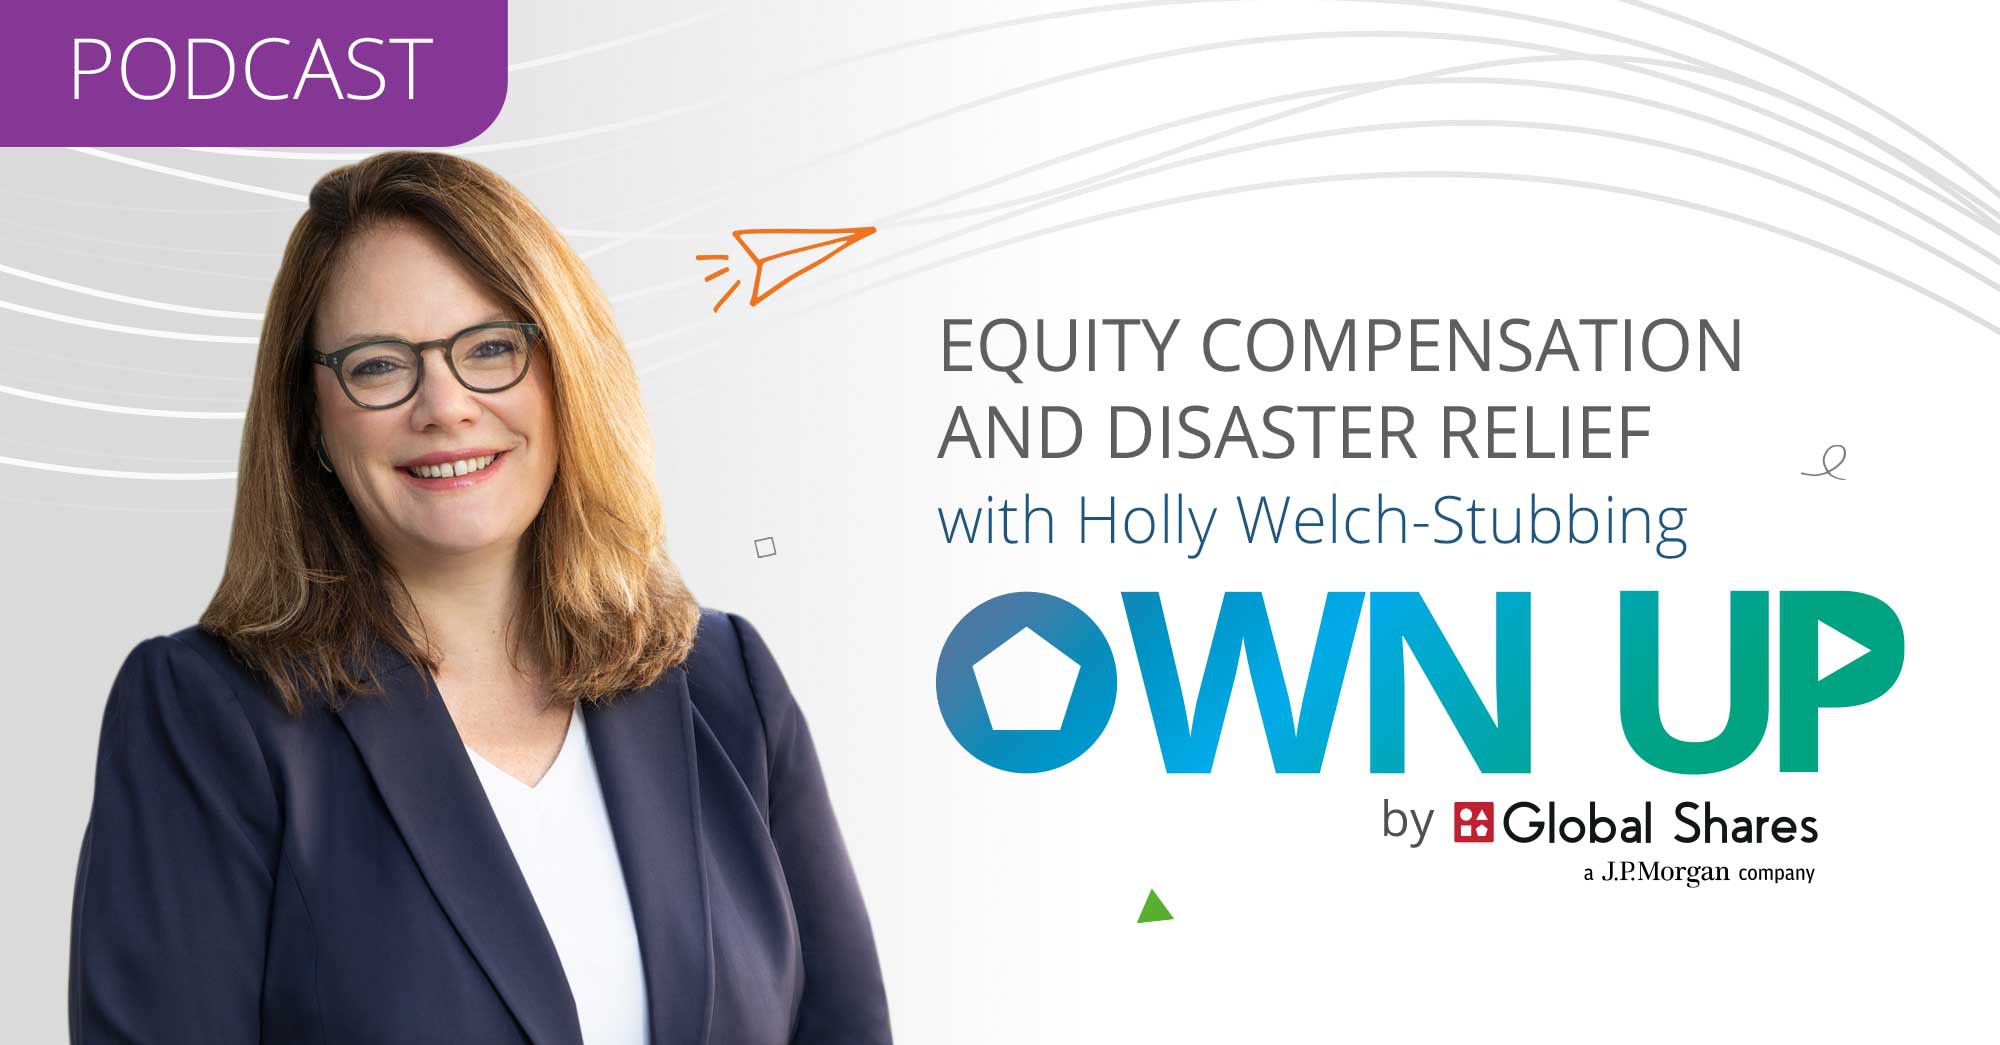 Own Up Podcast: Equity Compensation and Disaster Relief with Holly Welch-Stubbing